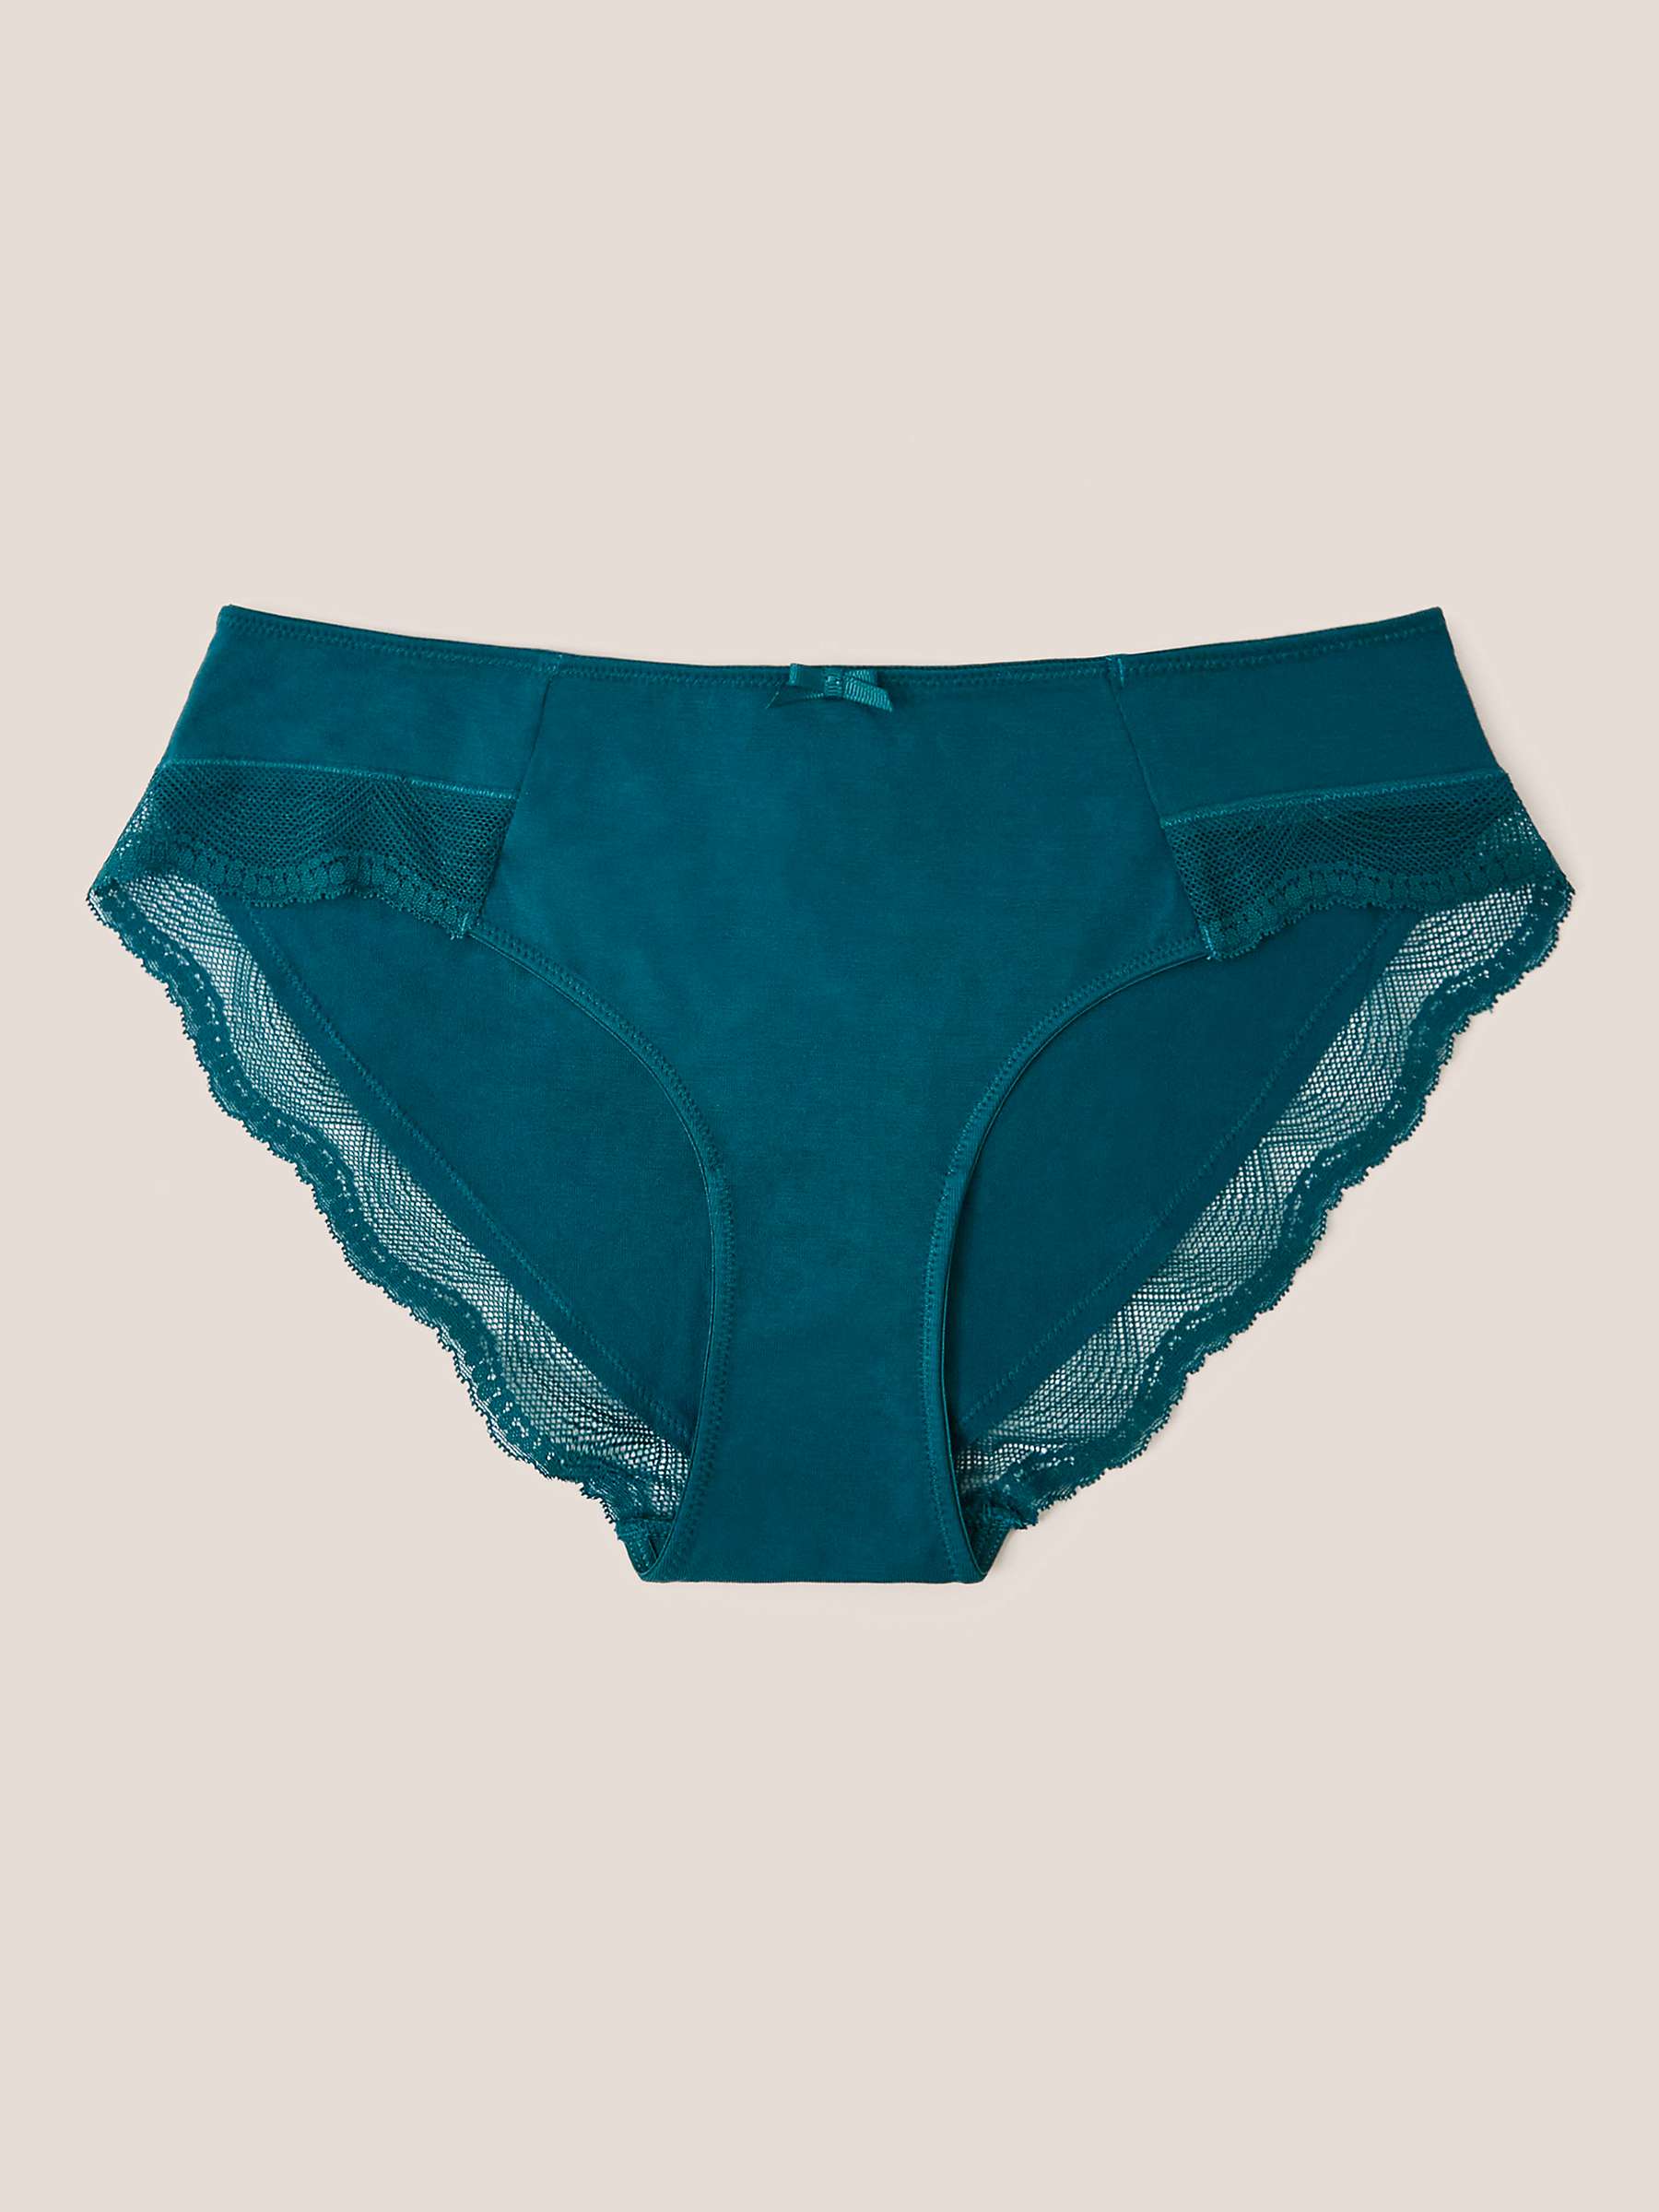 Buy White Stuff Lace Trim Shortie Knickers, Mid Teal Online at johnlewis.com